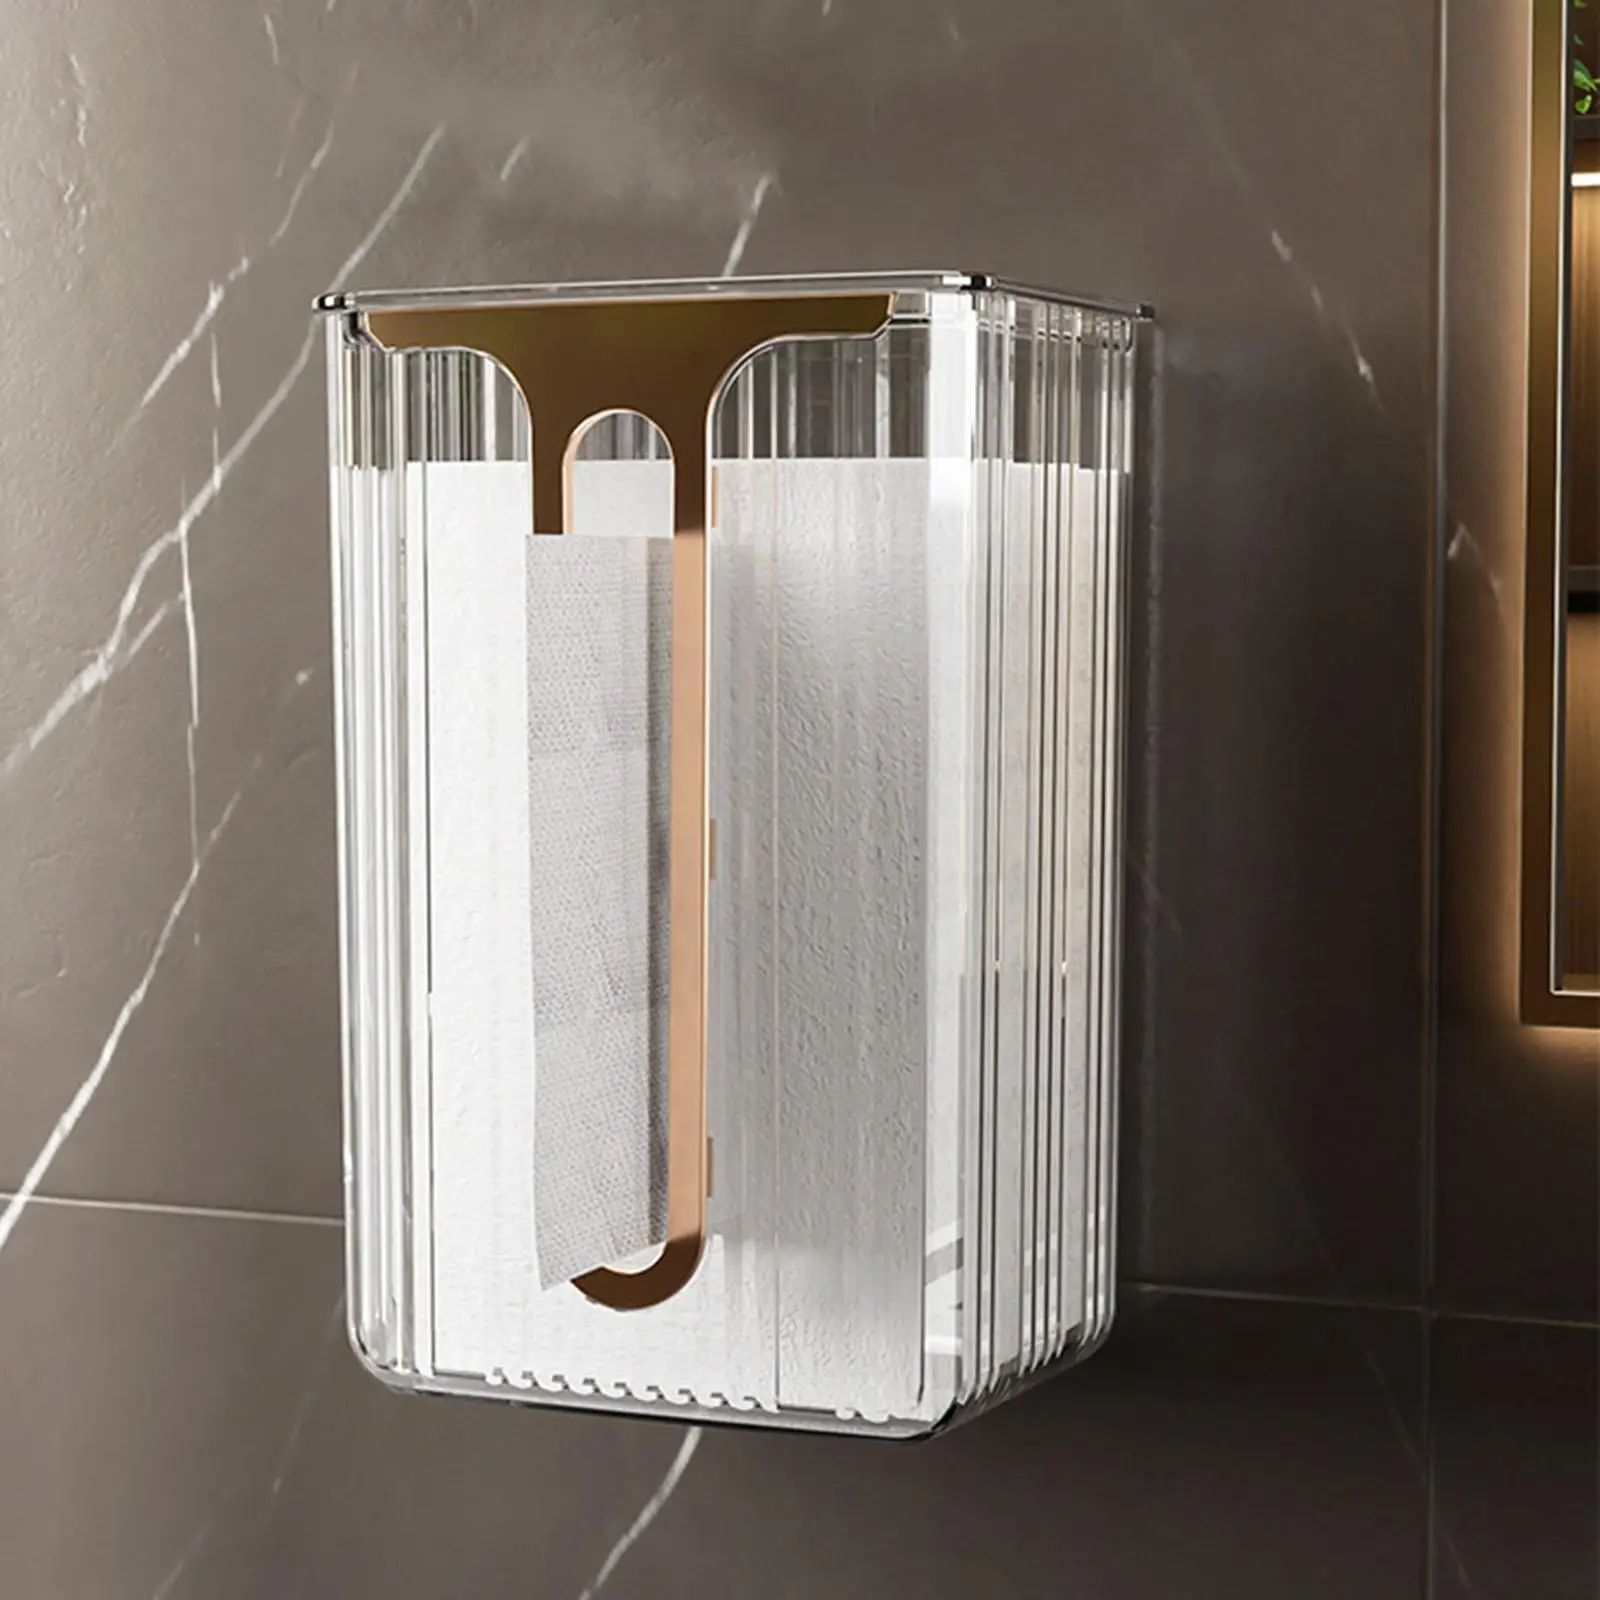 Facial Tissues Container Organizer Wall Mounted for Restaurant Bedroom